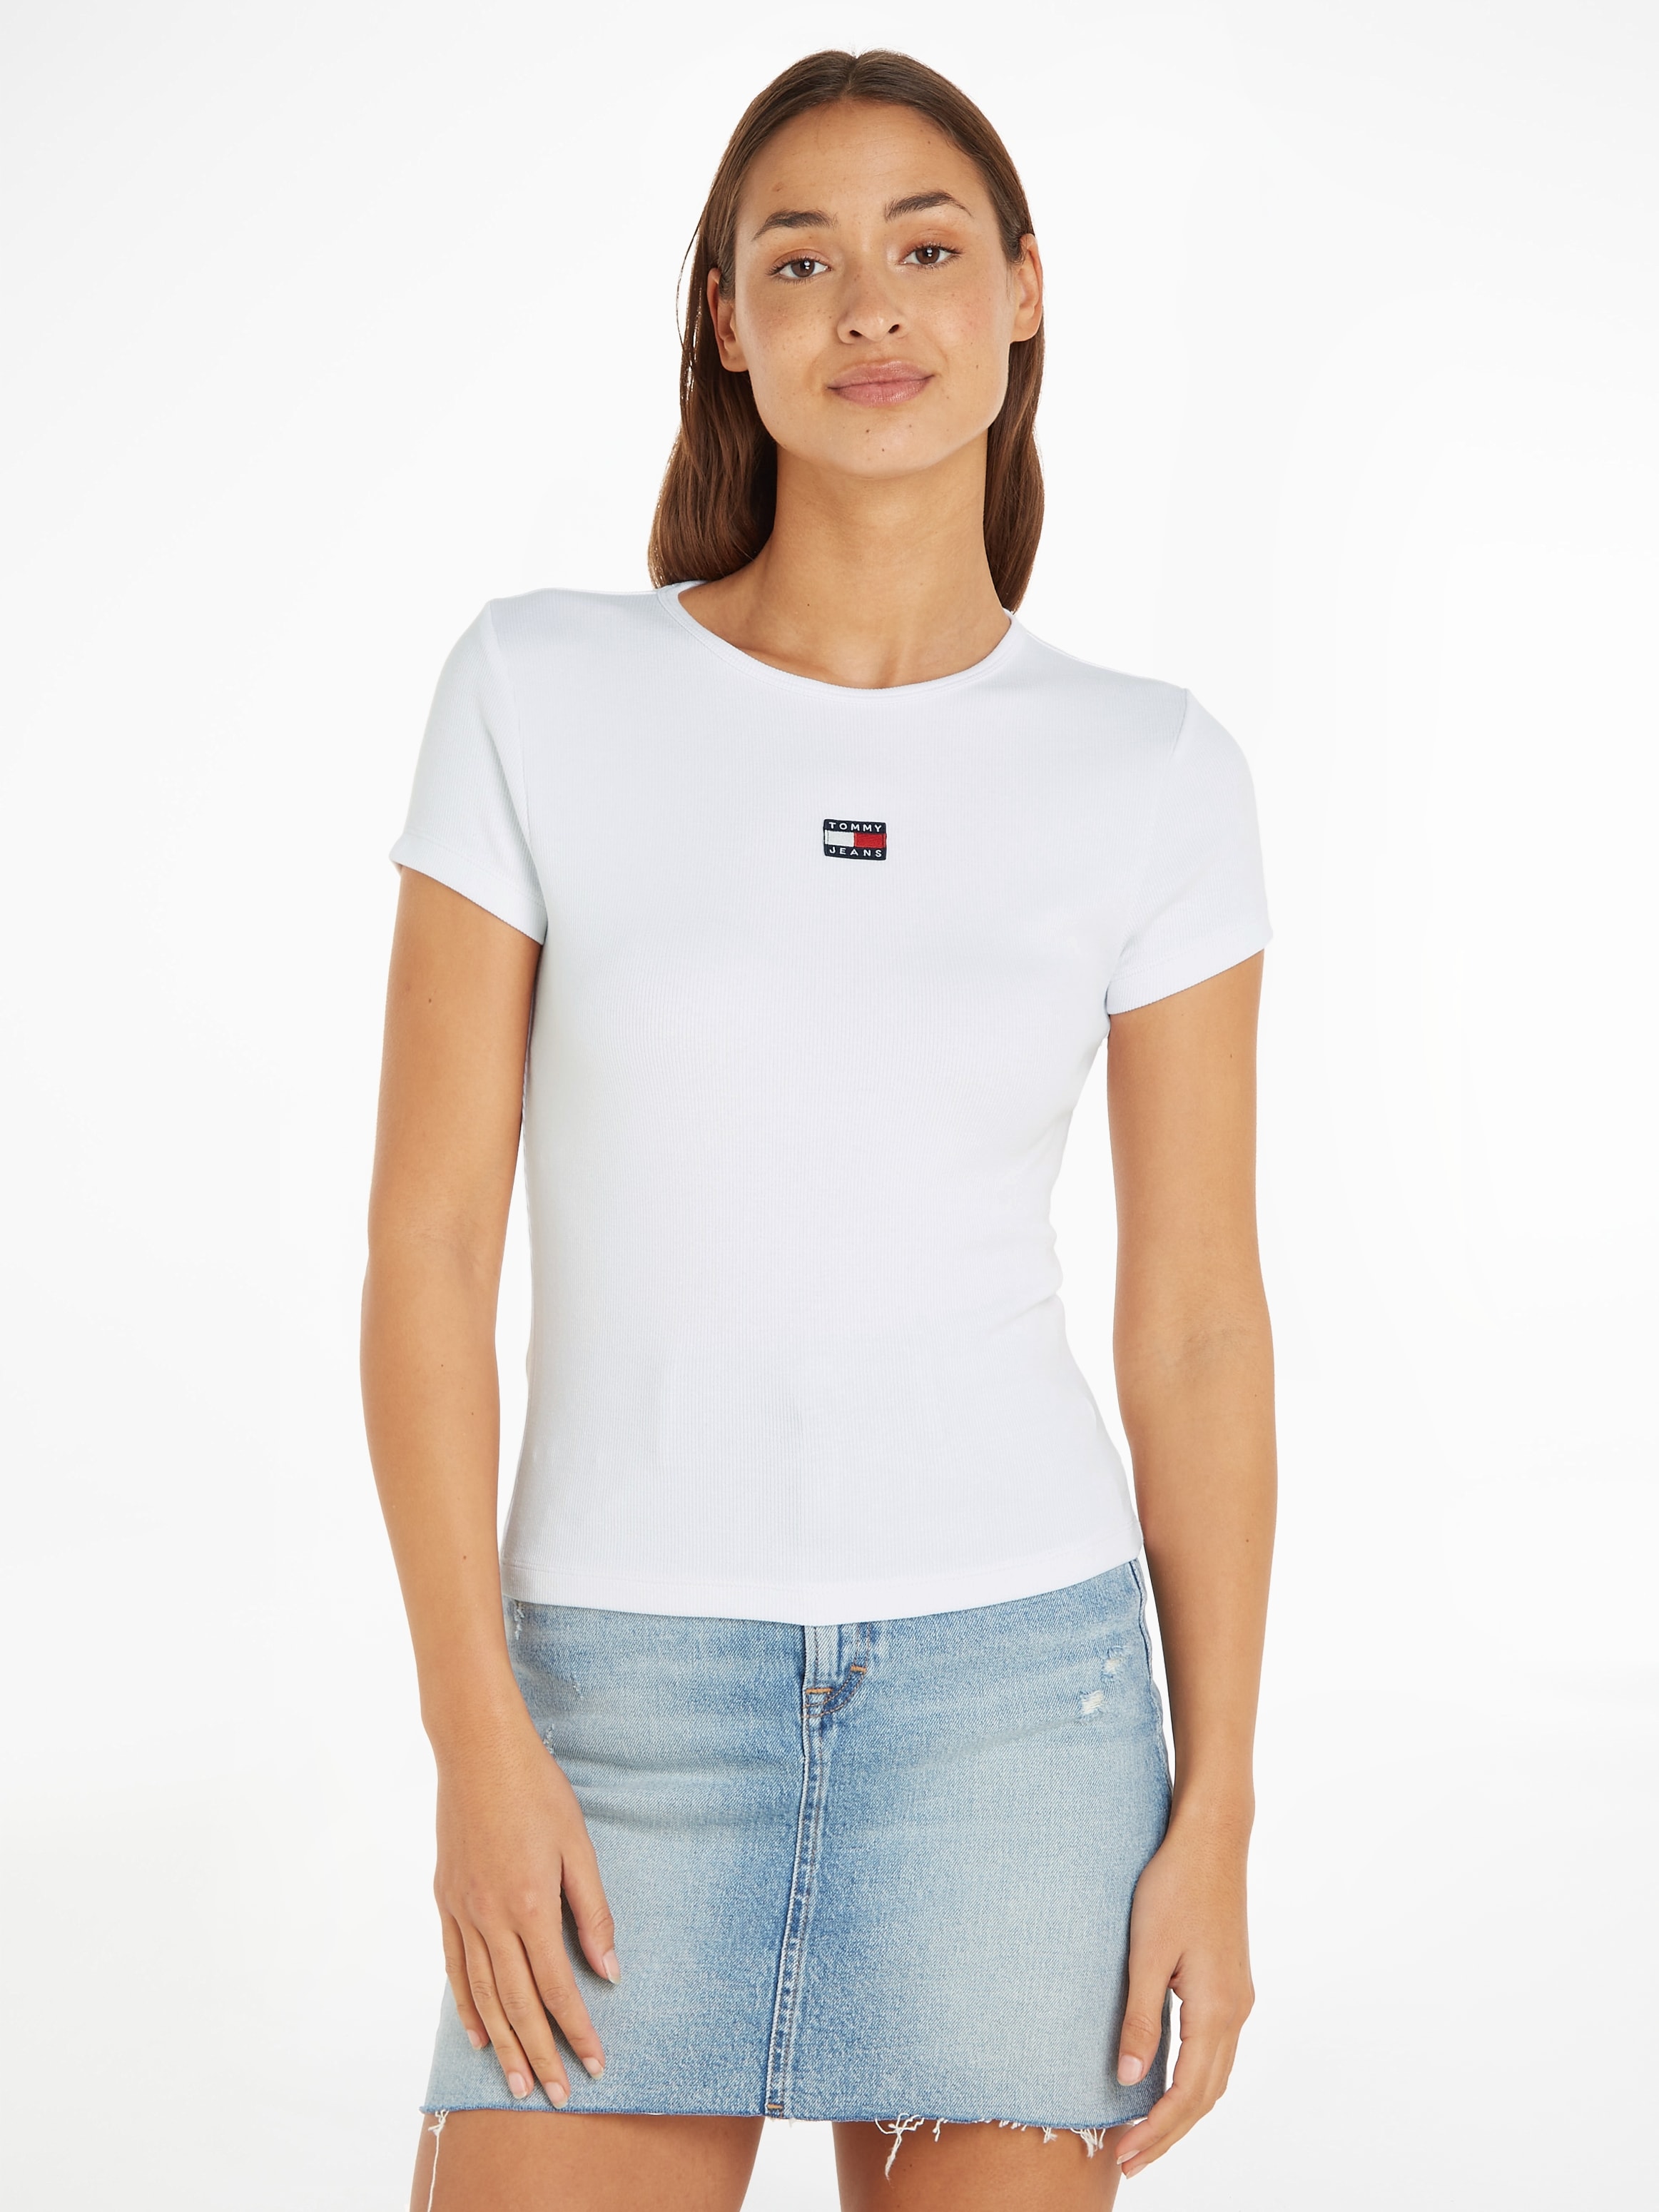 XS T-Shirt mit TEE«, Logobadge BBY BADGE »TJW ♕ bei Tommy RIB Jeans